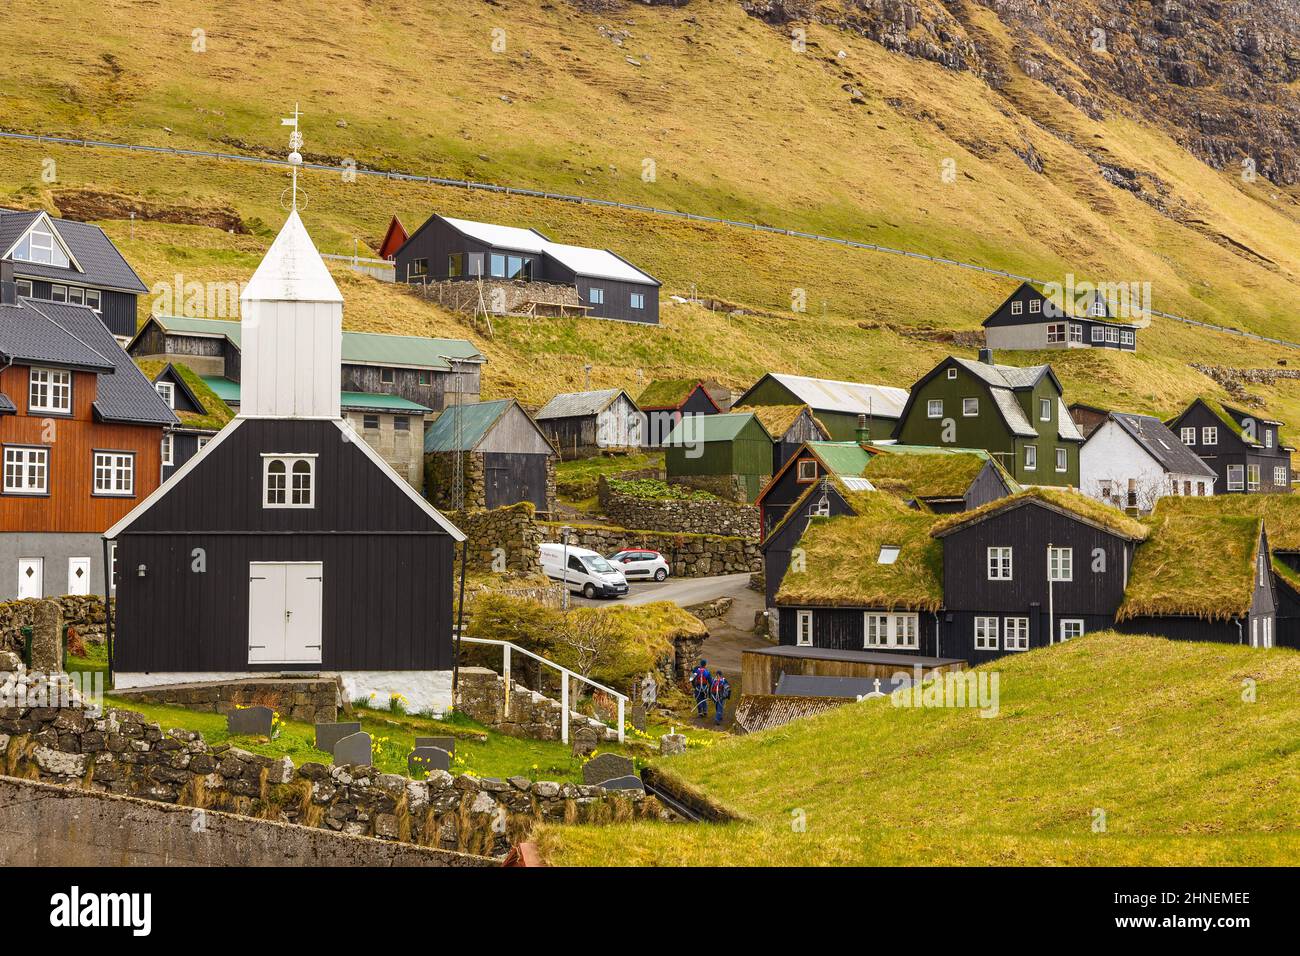 Bour, Faroe Islands - 30 April 2018: View of the wooden church in Bour on Vagar island. A small village situated on the slope of a hill. Faroe Islands Stock Photo